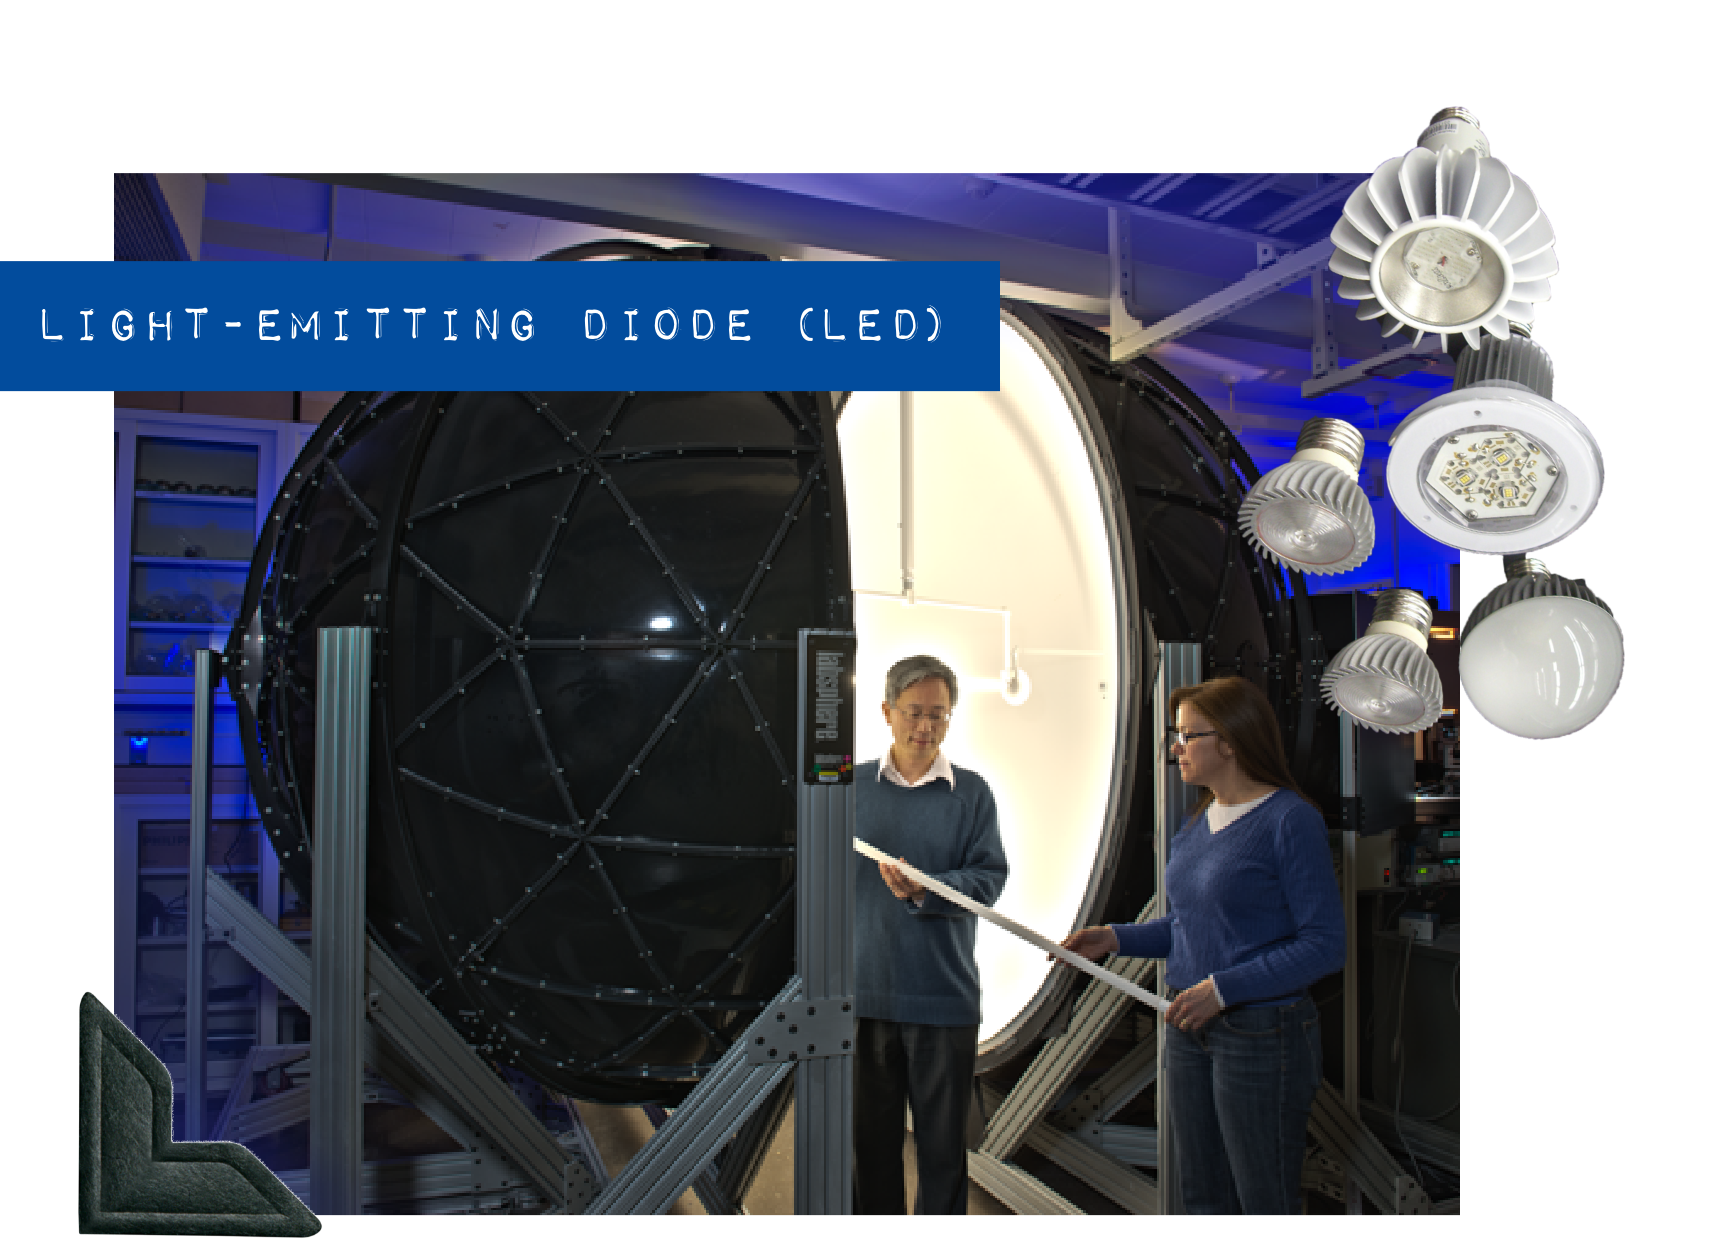 Photo of scientists studying a lighting strip has blue embossed label saying "Light-emitting diode (LED)"